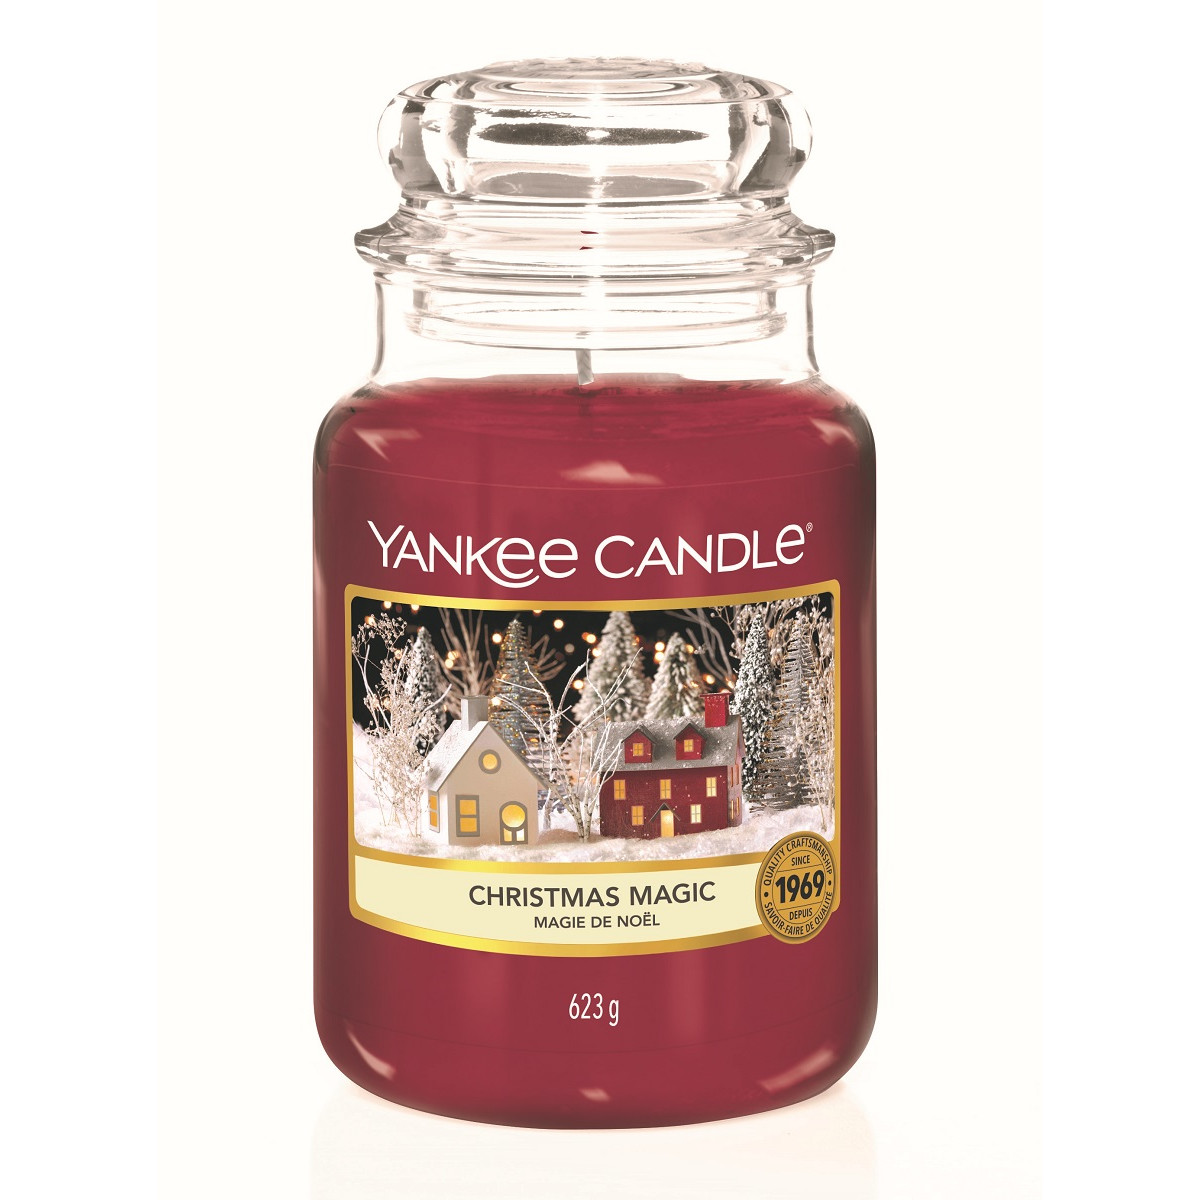 Yankee Candle® Christmas Magic Großes Glas 623g, 31,90 €